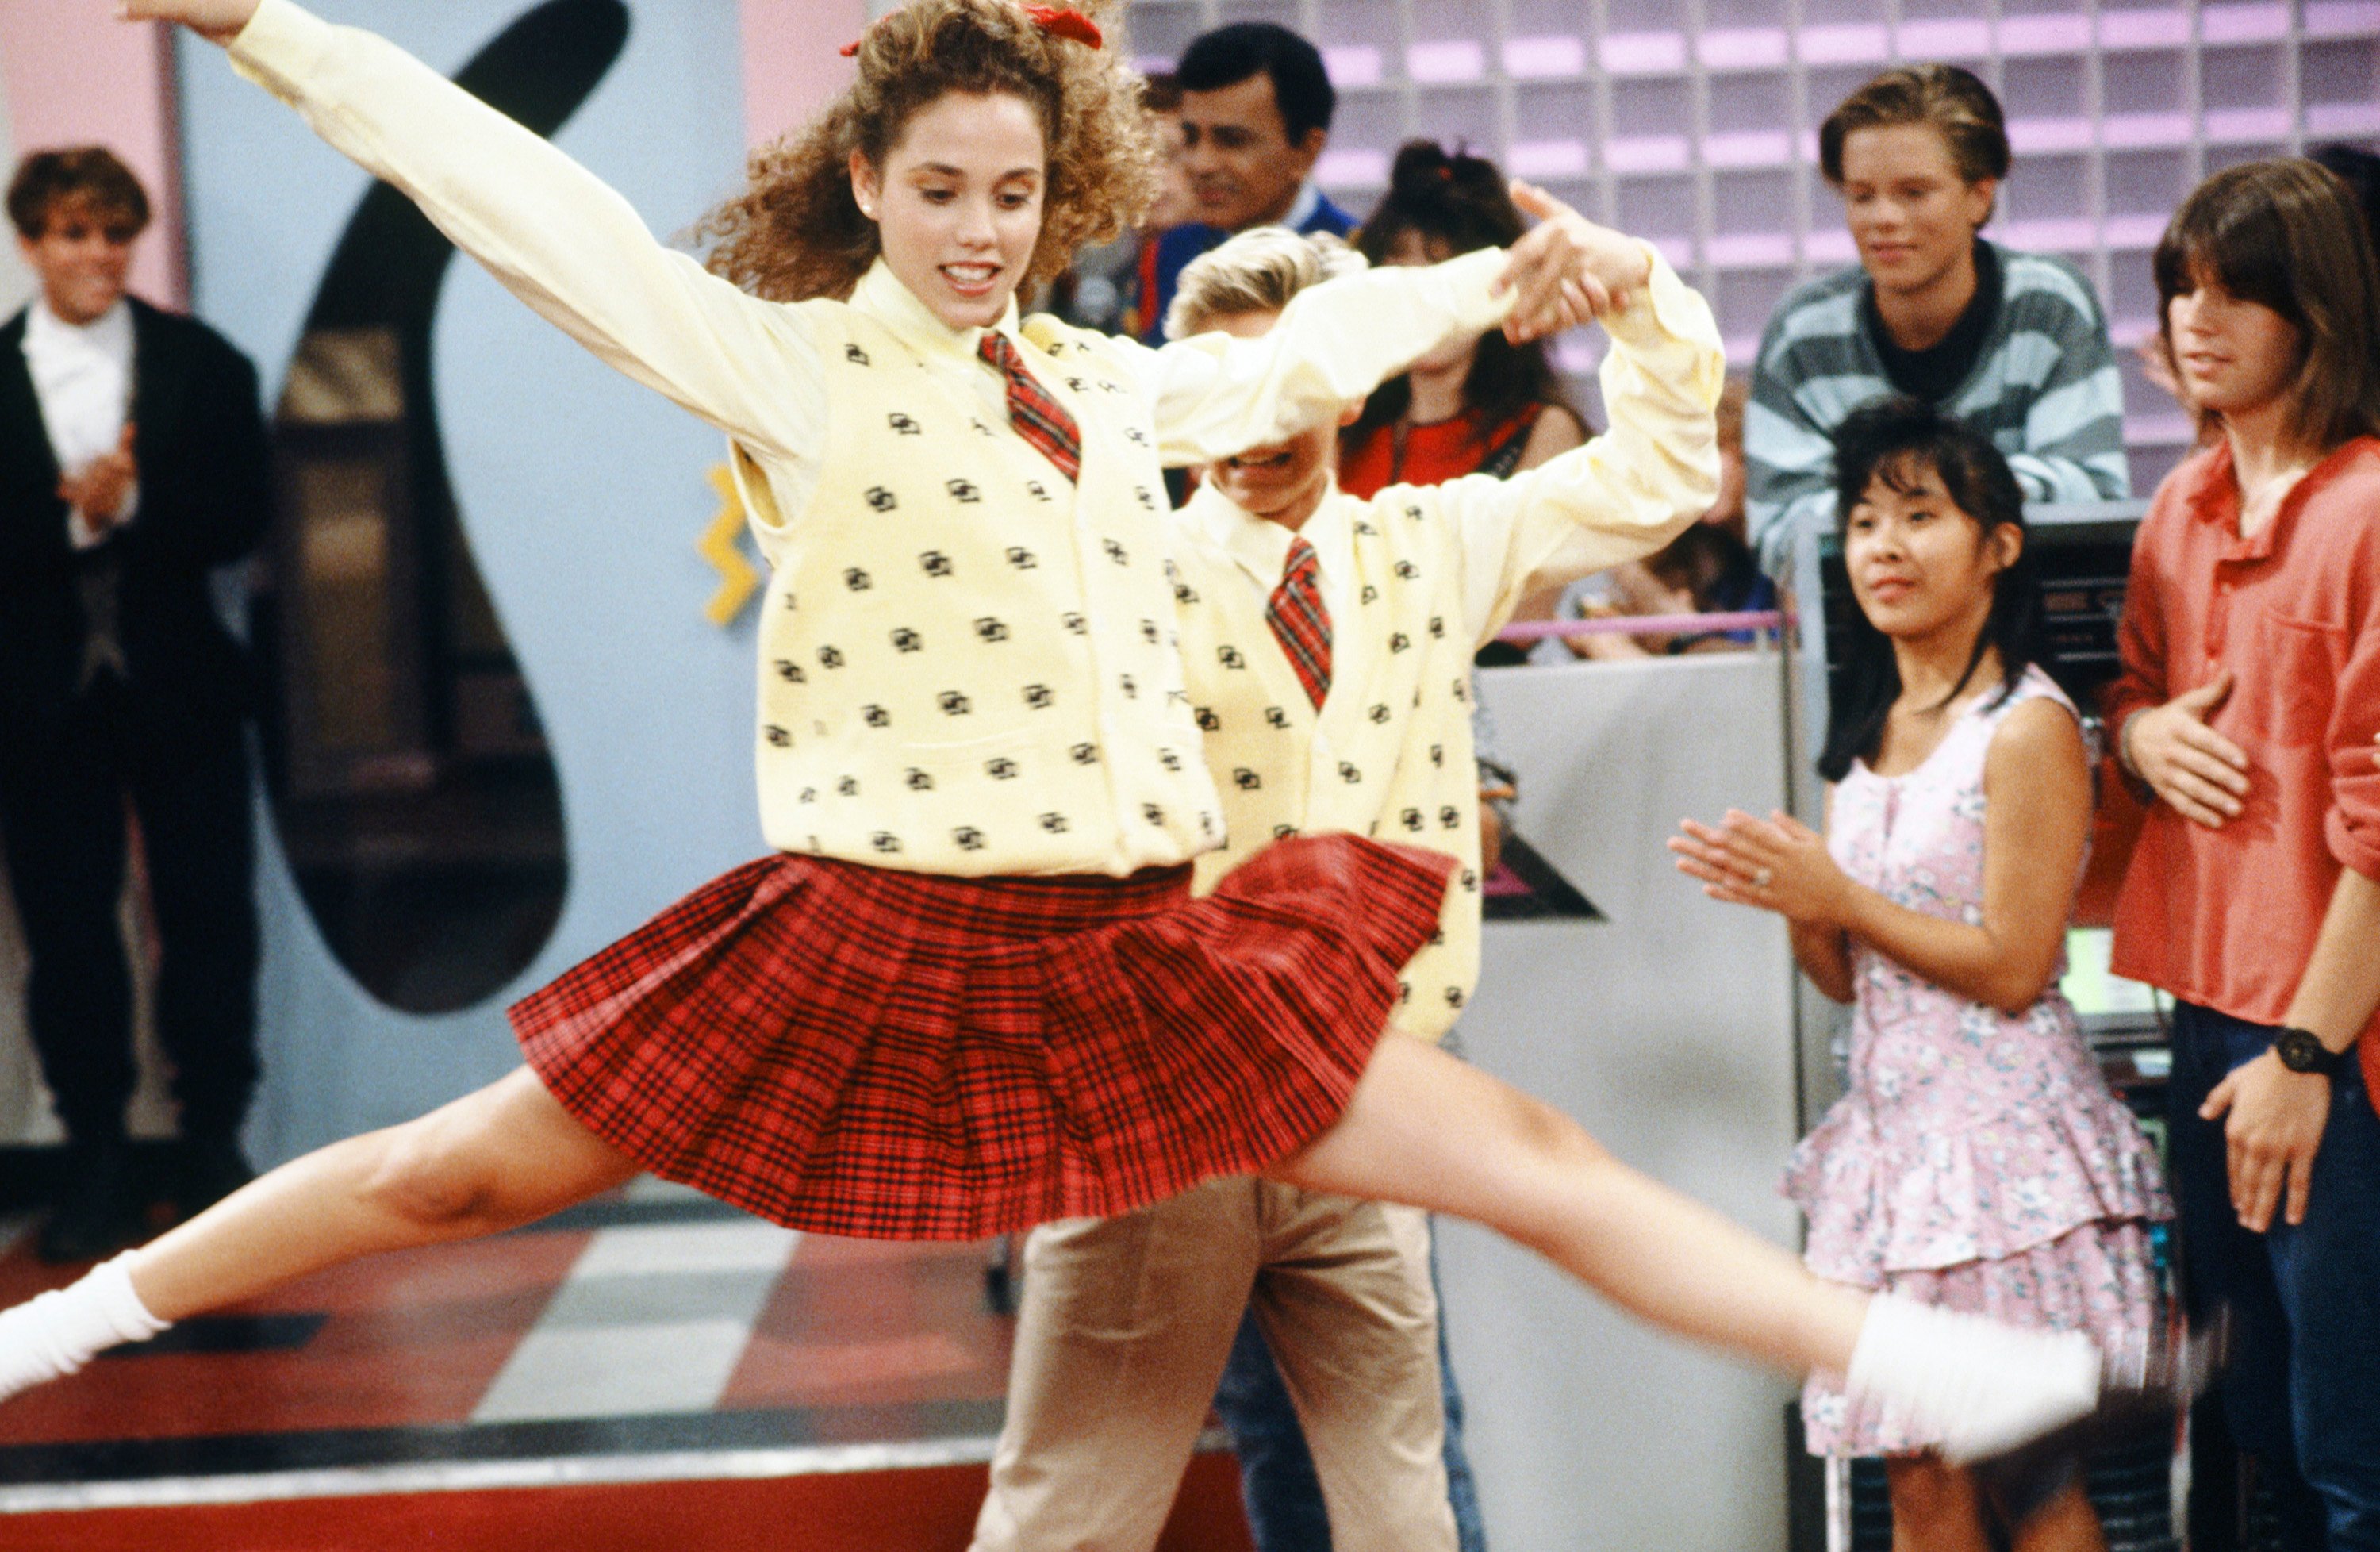 Elizabeth Berkley is seen as Jessie Spano in a dance costume at the Max in a scene for 'Saved by the Bell'